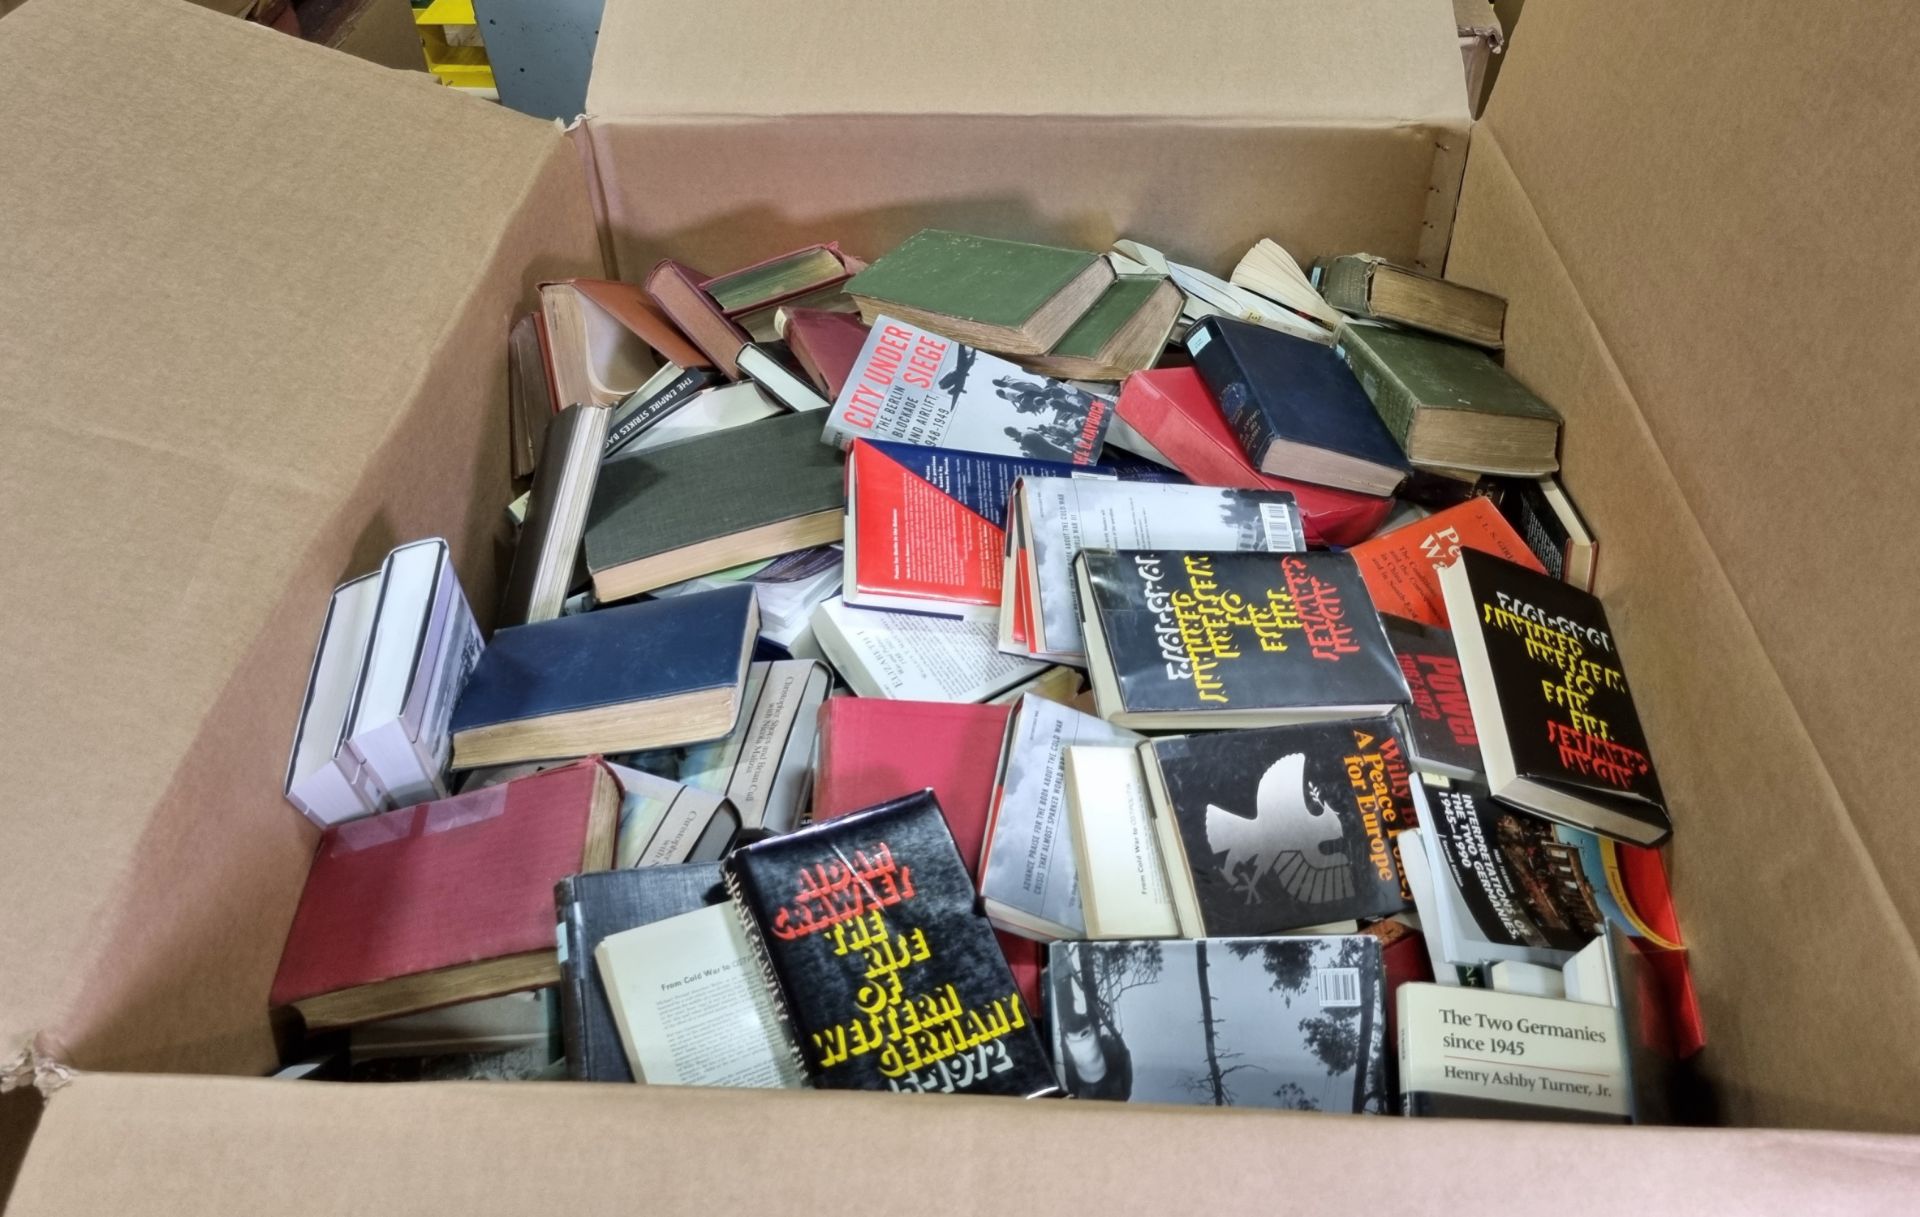 2x pallet sized boxes of books - fictional, non-fictional, military and mixed genre